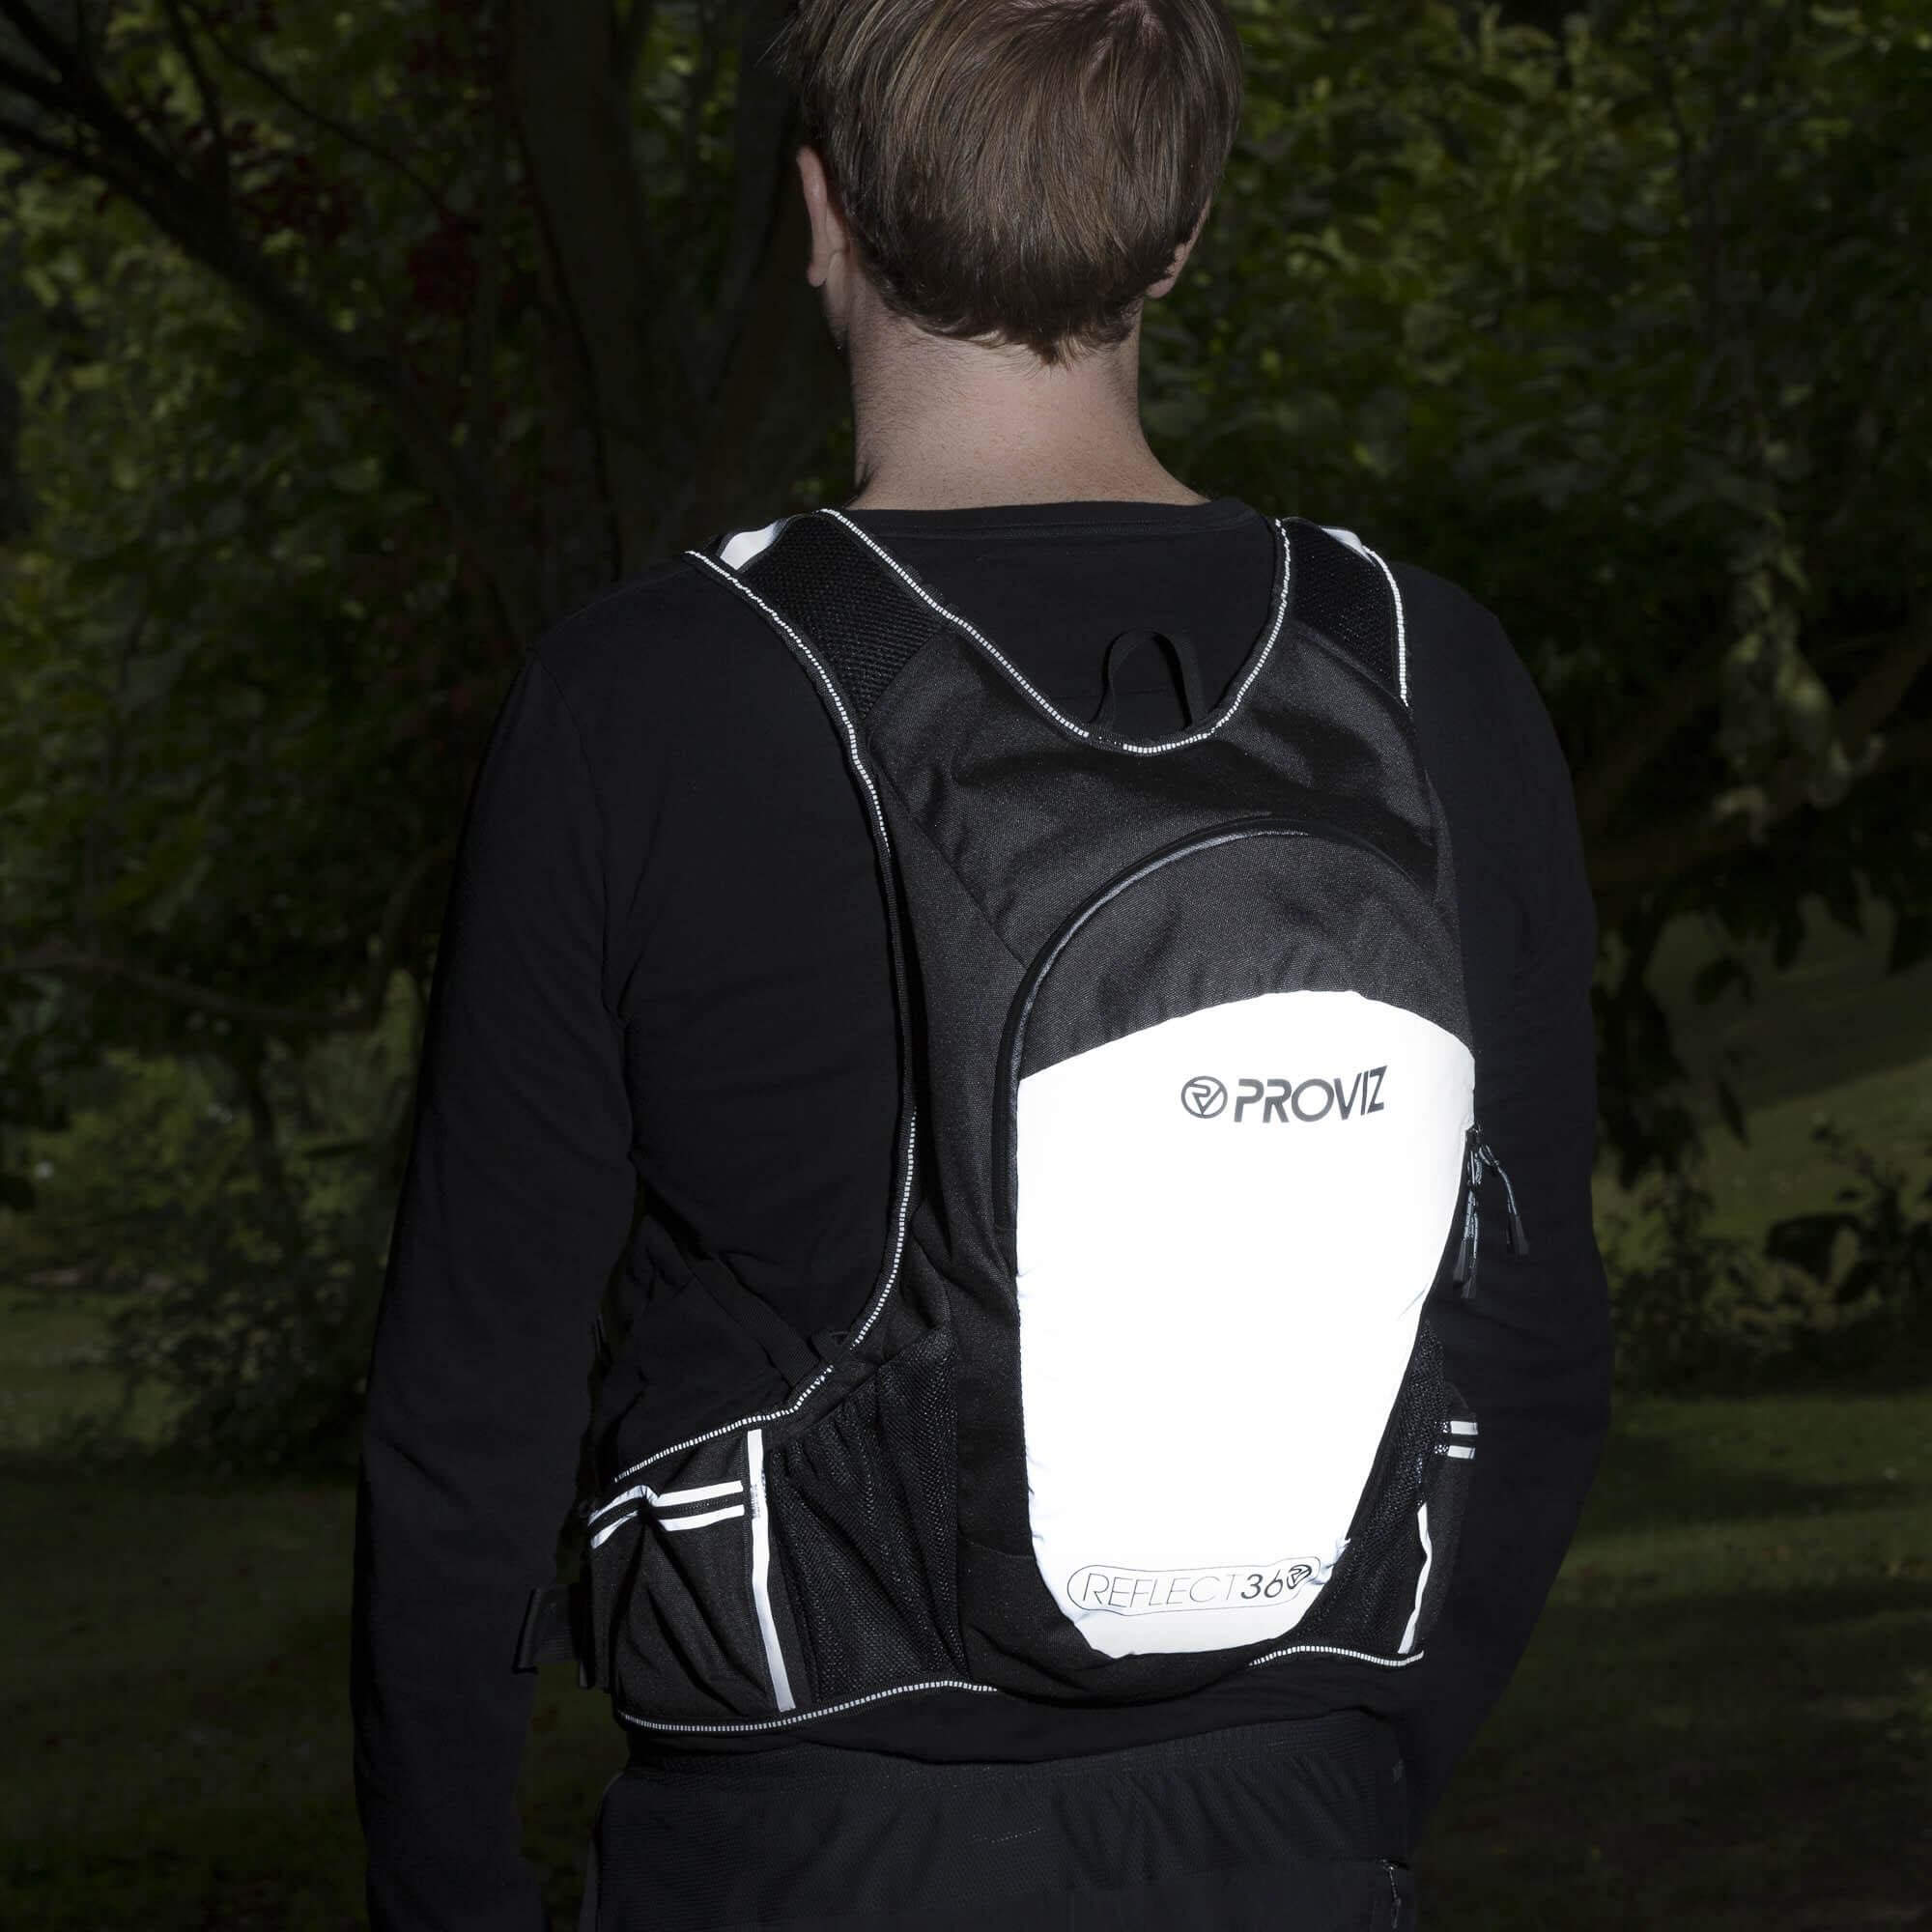 Proviz running backpacks and covers to keep your goods protected and keep you visible. 